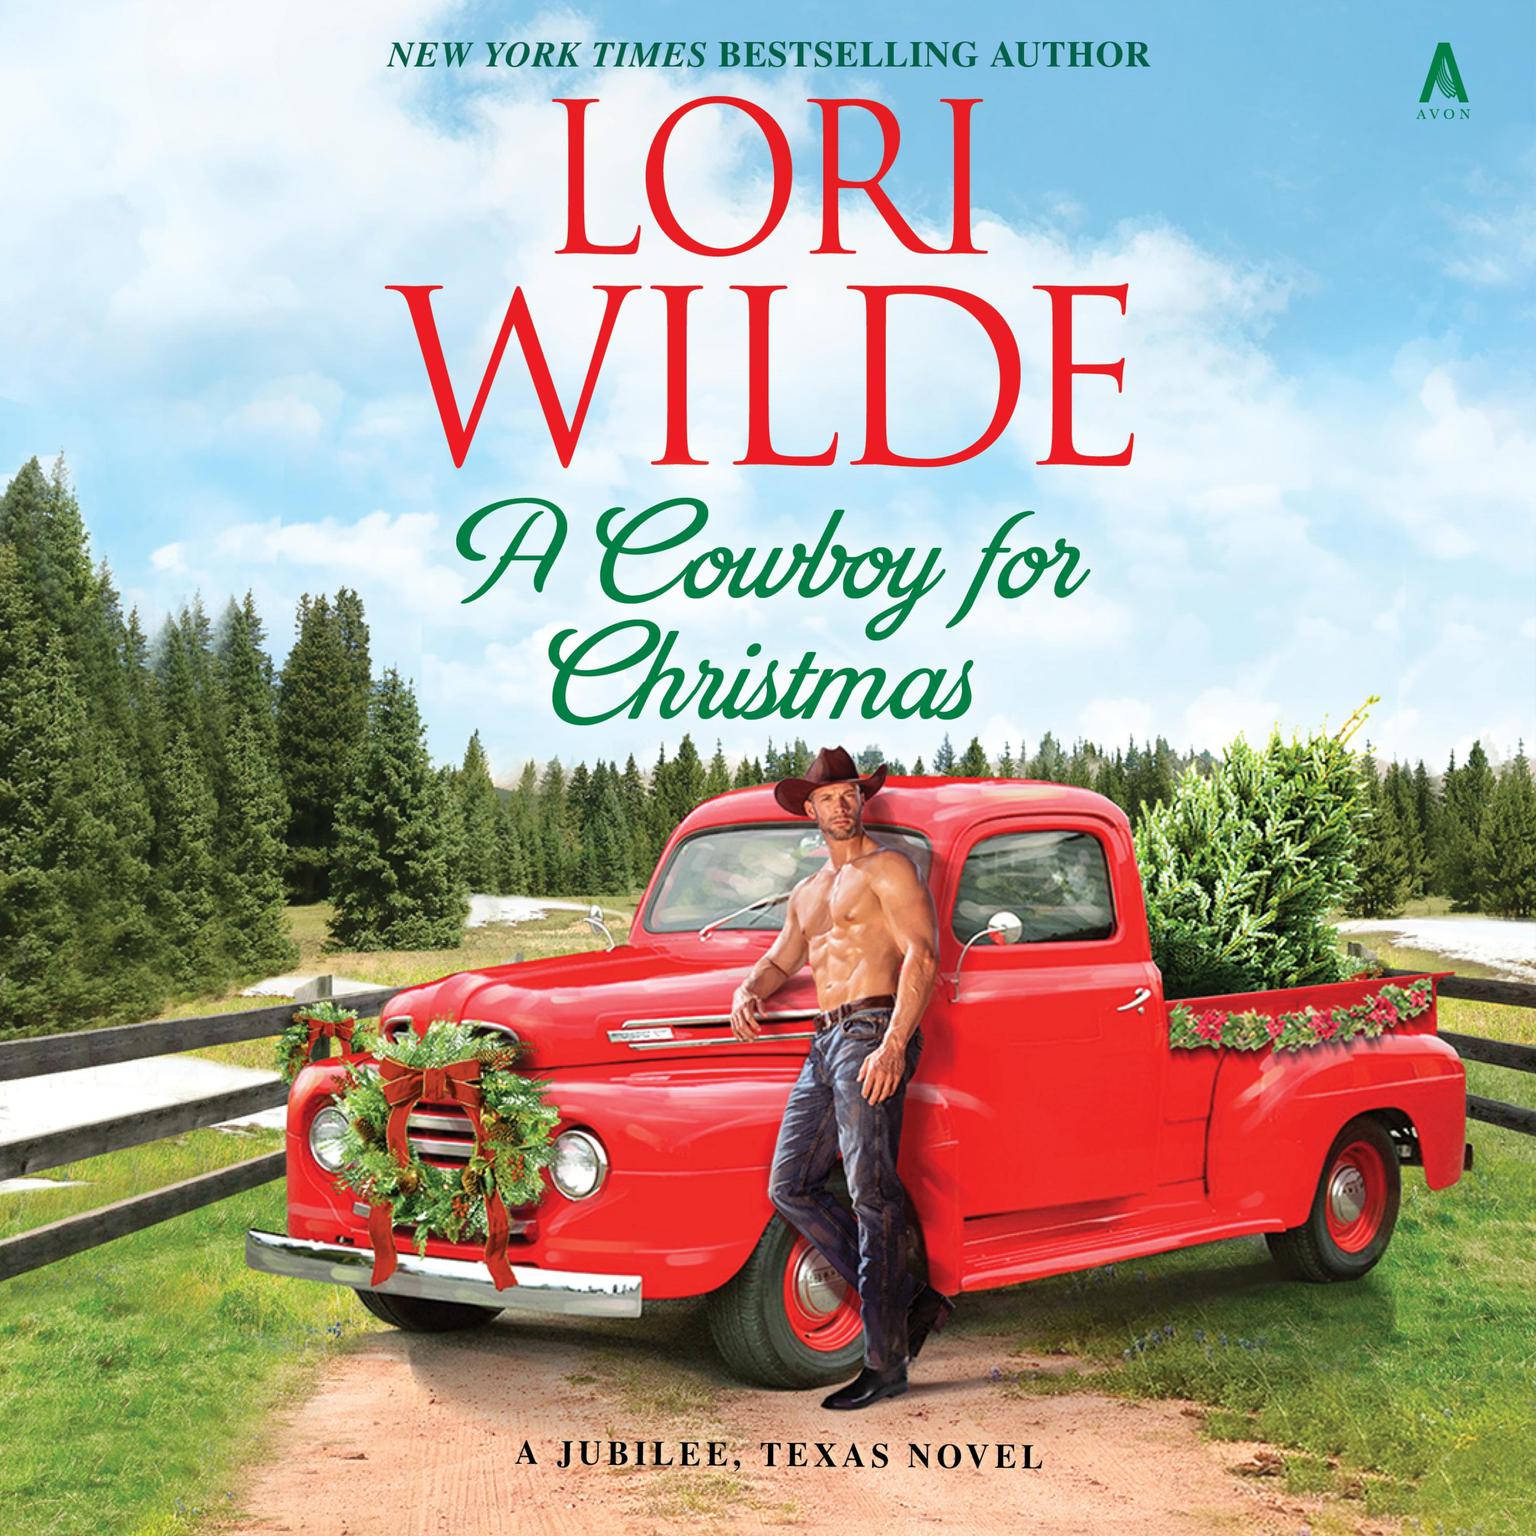 A Cowboy for Christmas: A Jubilee, Texas Novel Audiobook, by Lori Wilde